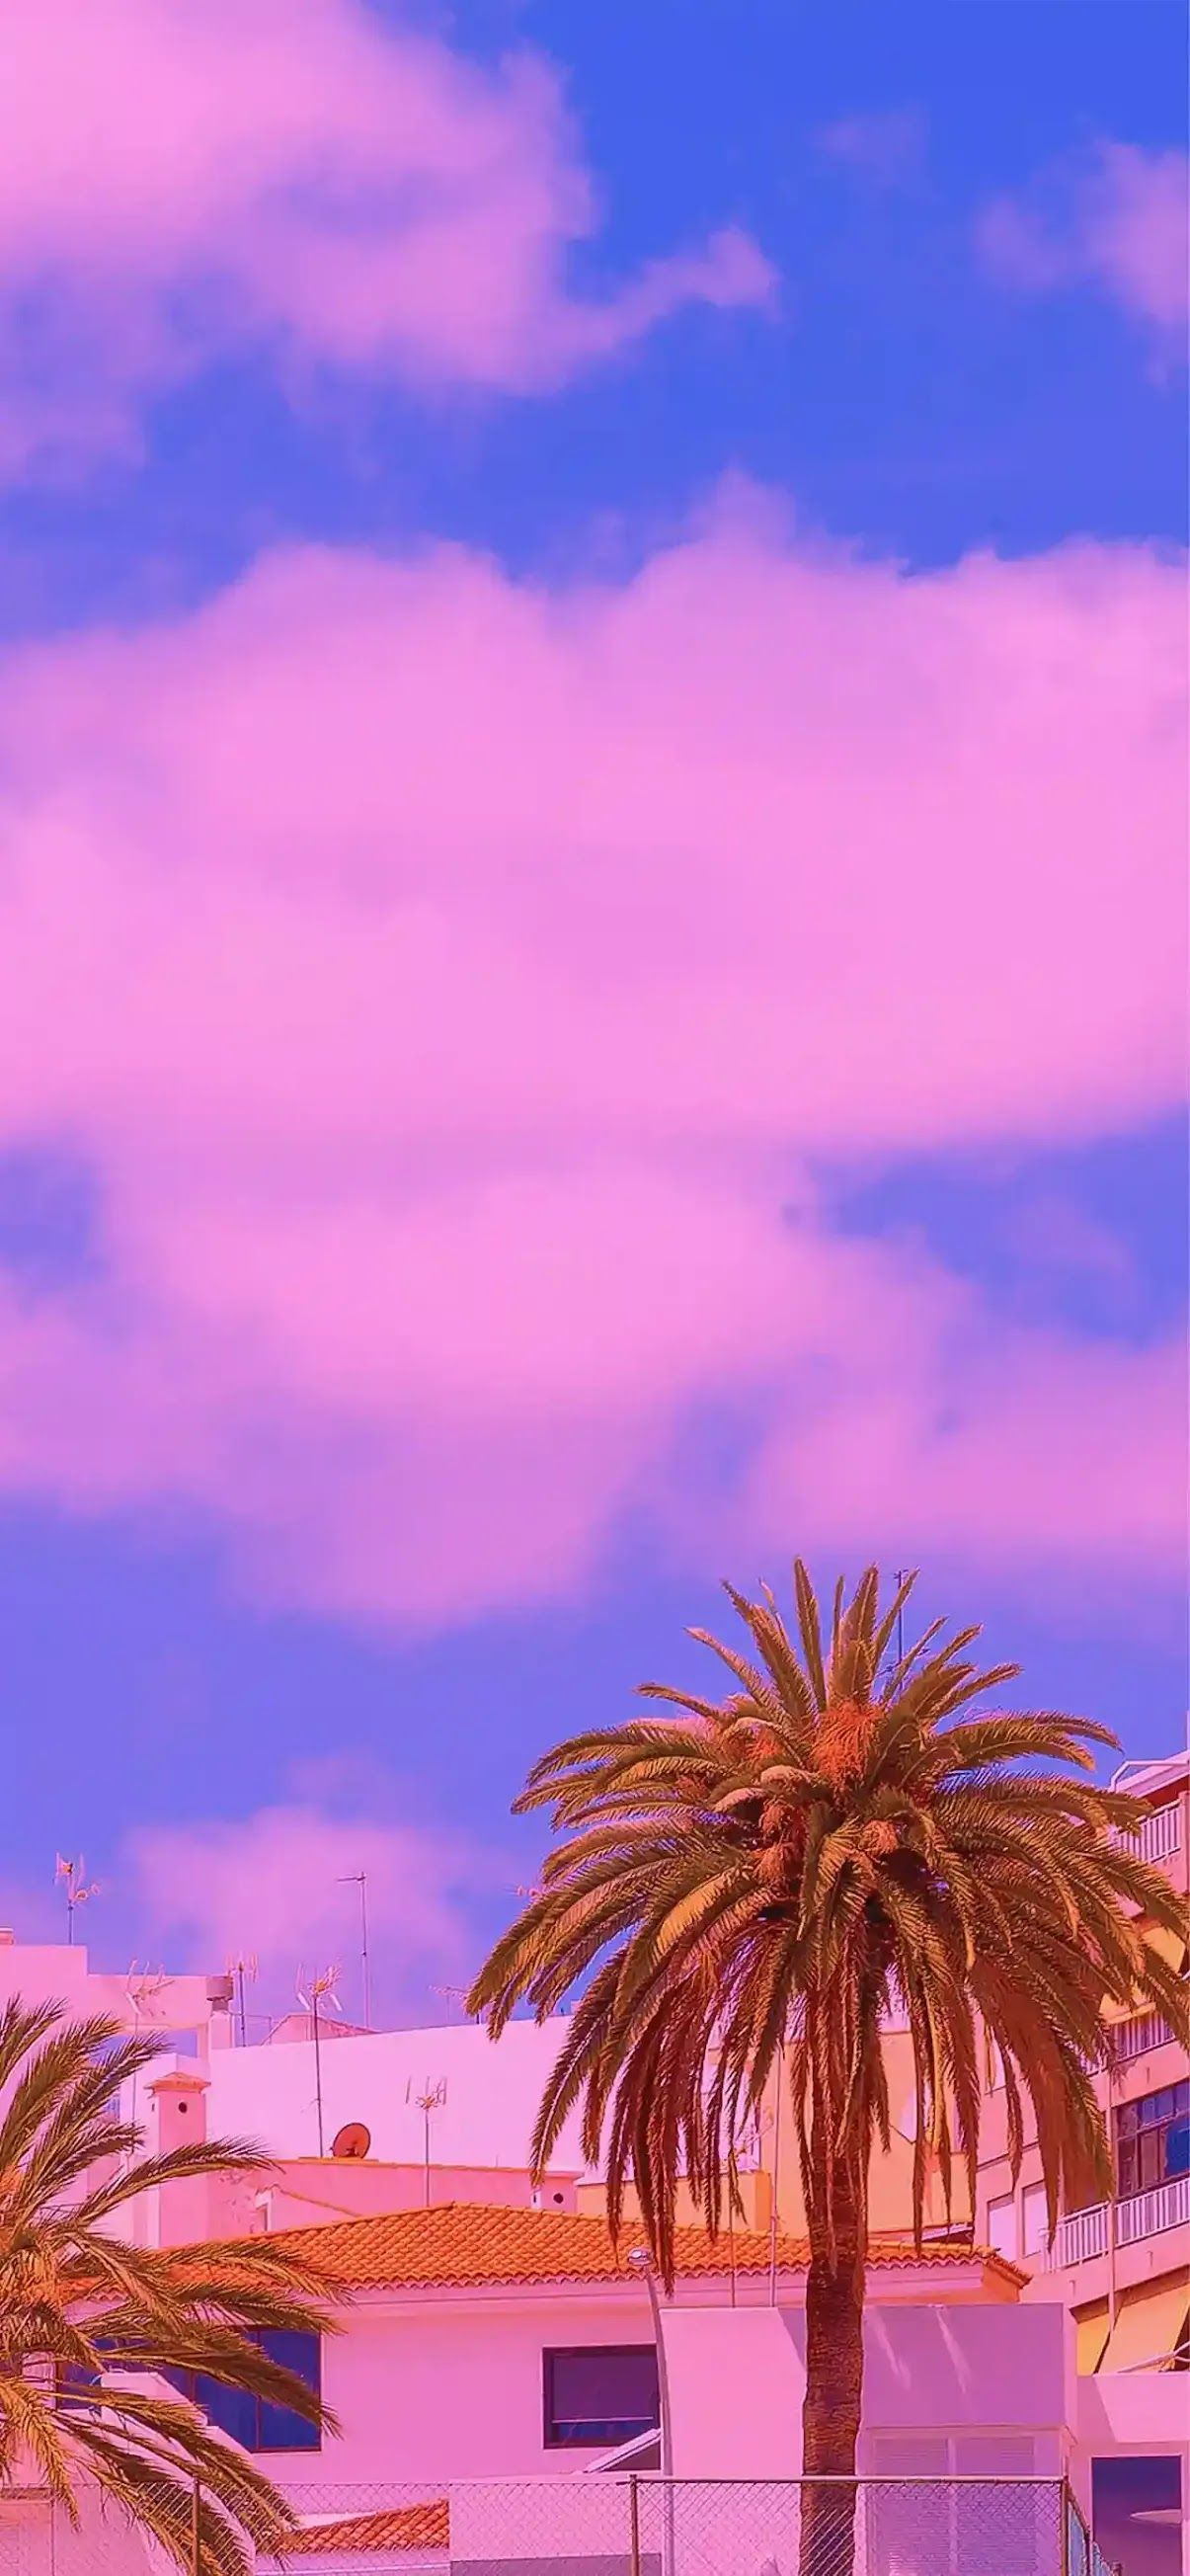 Aesthetic wallpaper for iPhone